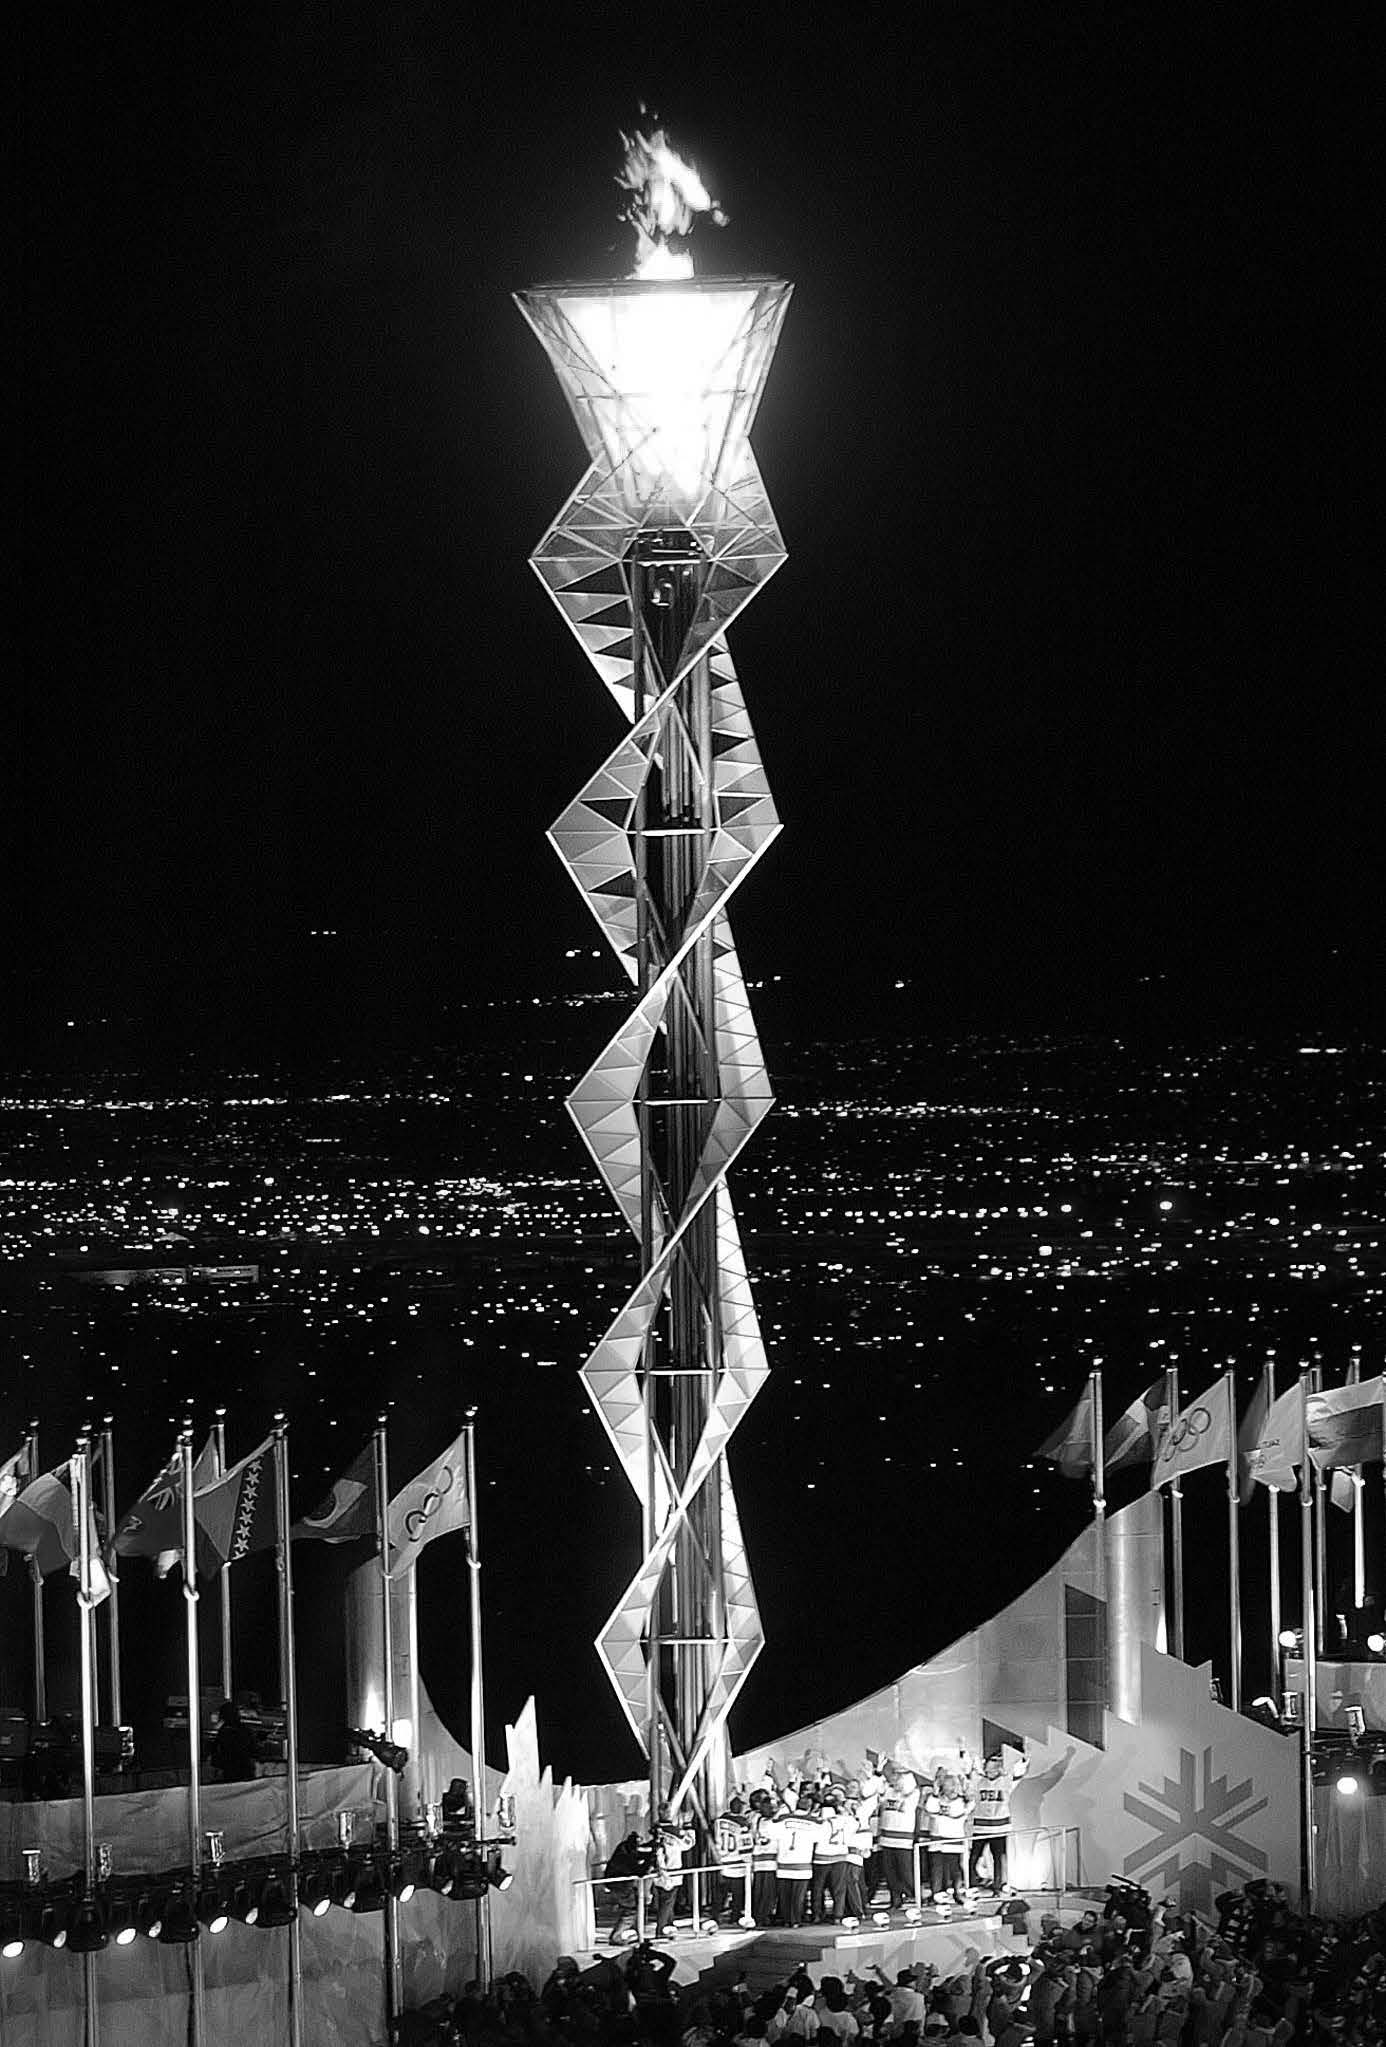 Salt Lake City’s Olympic Flame, 2002. More than three dozen articles in the Washington Post dealt with some aspect of “Mormons” and the “Olympics” in the years between 2000 and 2002. Washington Post report Hank Steuver summarized his coverage of the games by noting that the Mormons “looked golden” in 2002. Photo by Preston Keres.